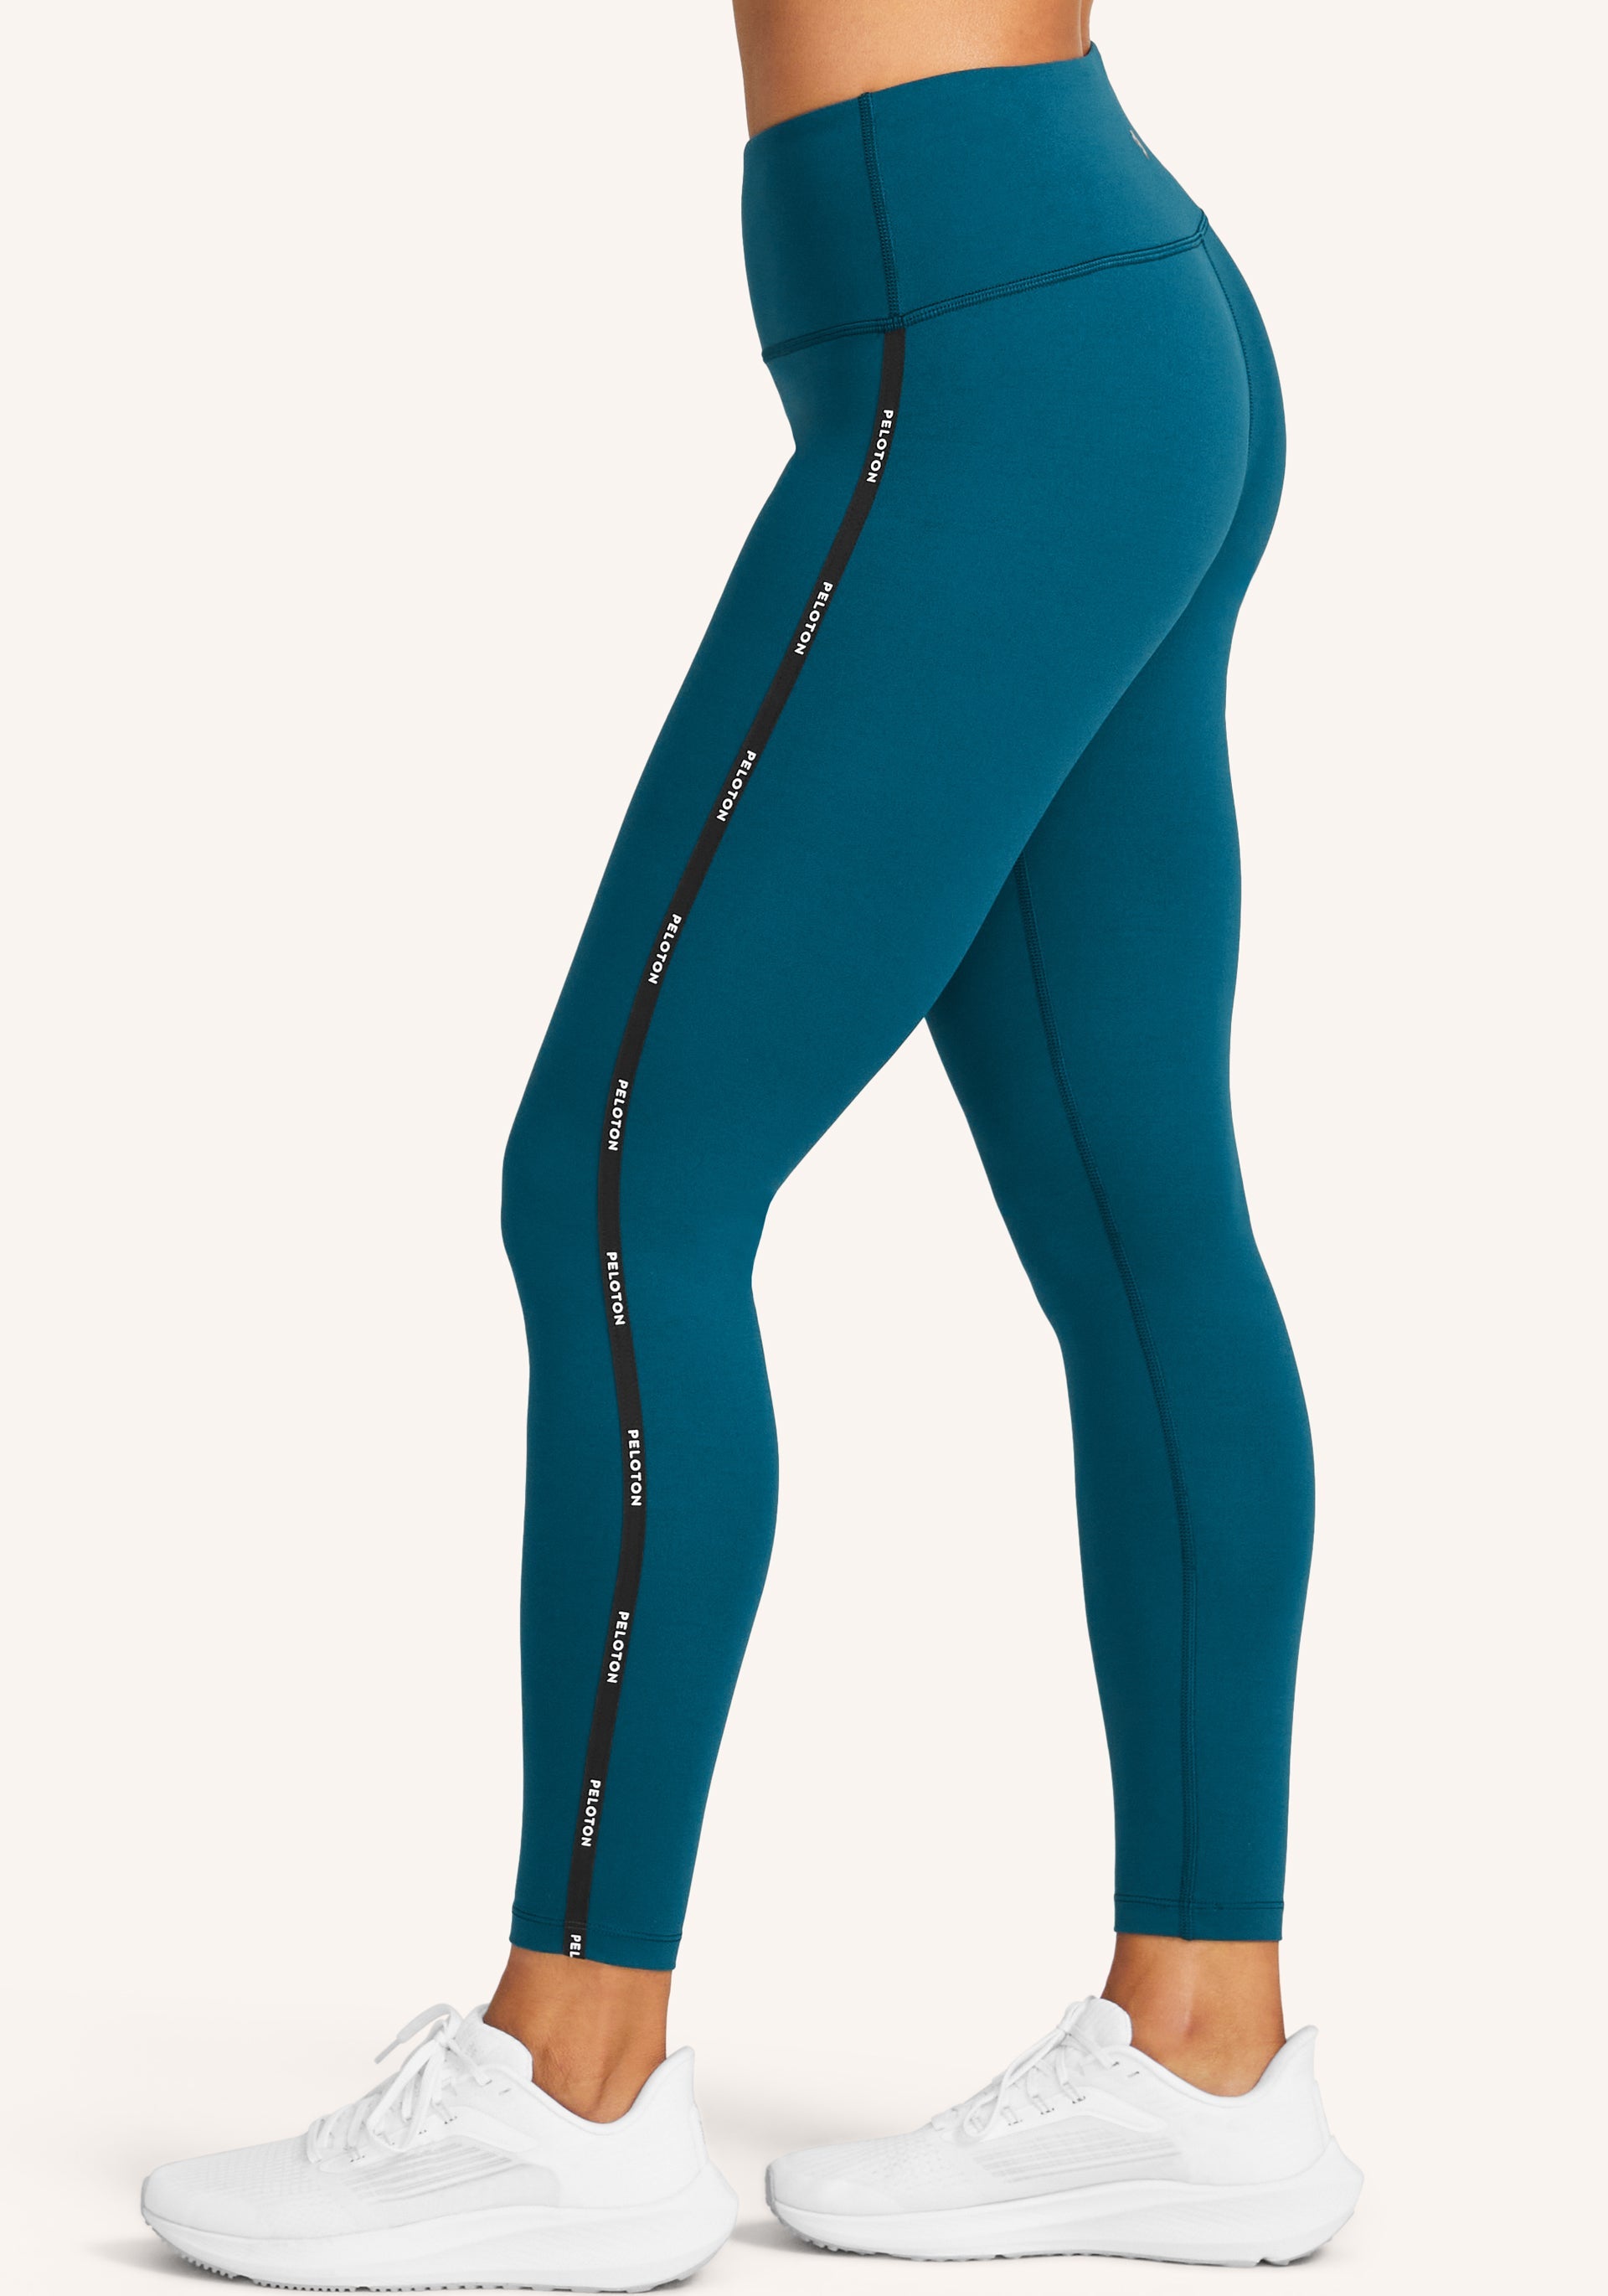 ⭐️This Just In!⭐️ Light up the room with the Jetset Legging